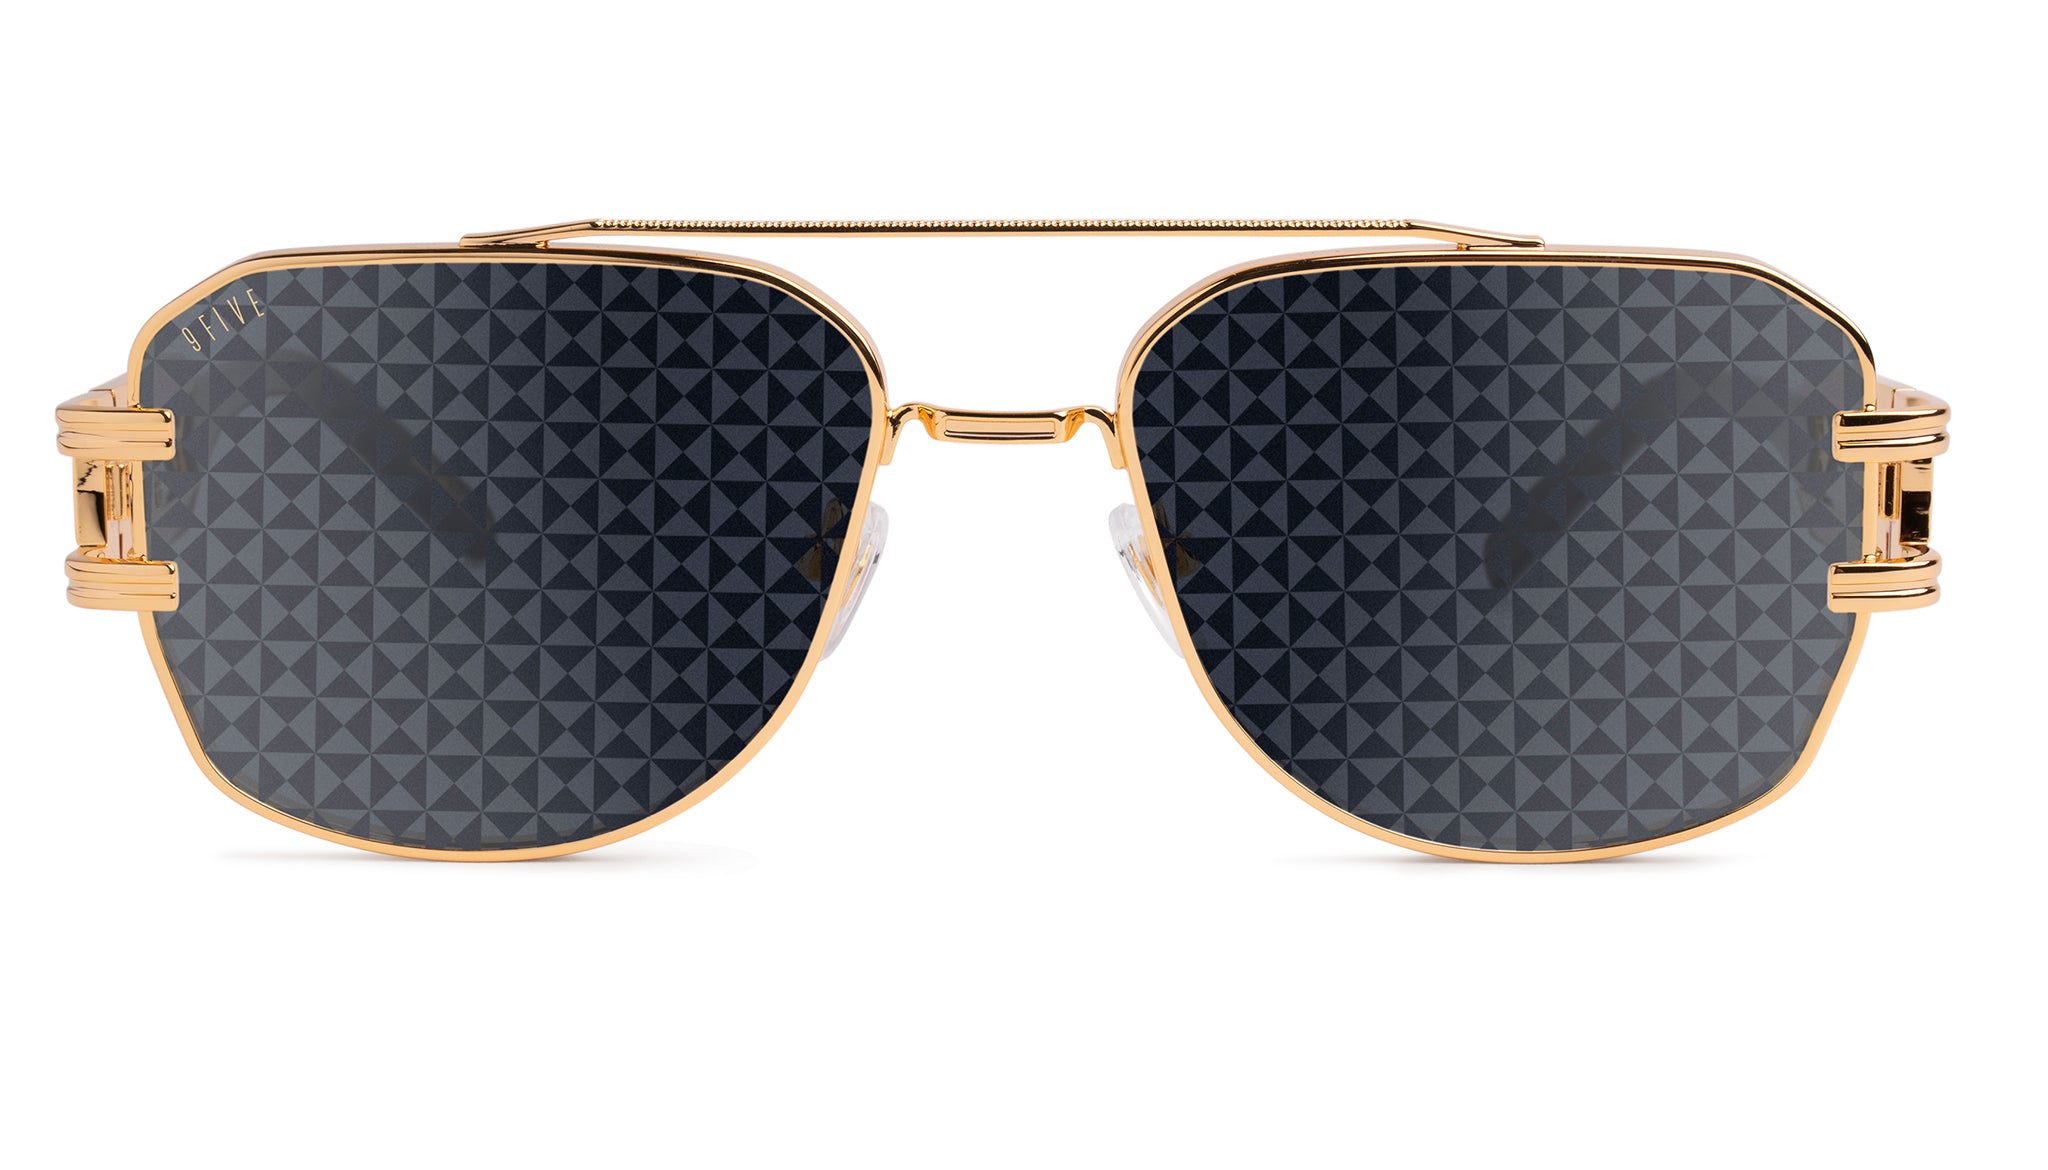 try before you buy louis vuitton sunglasses